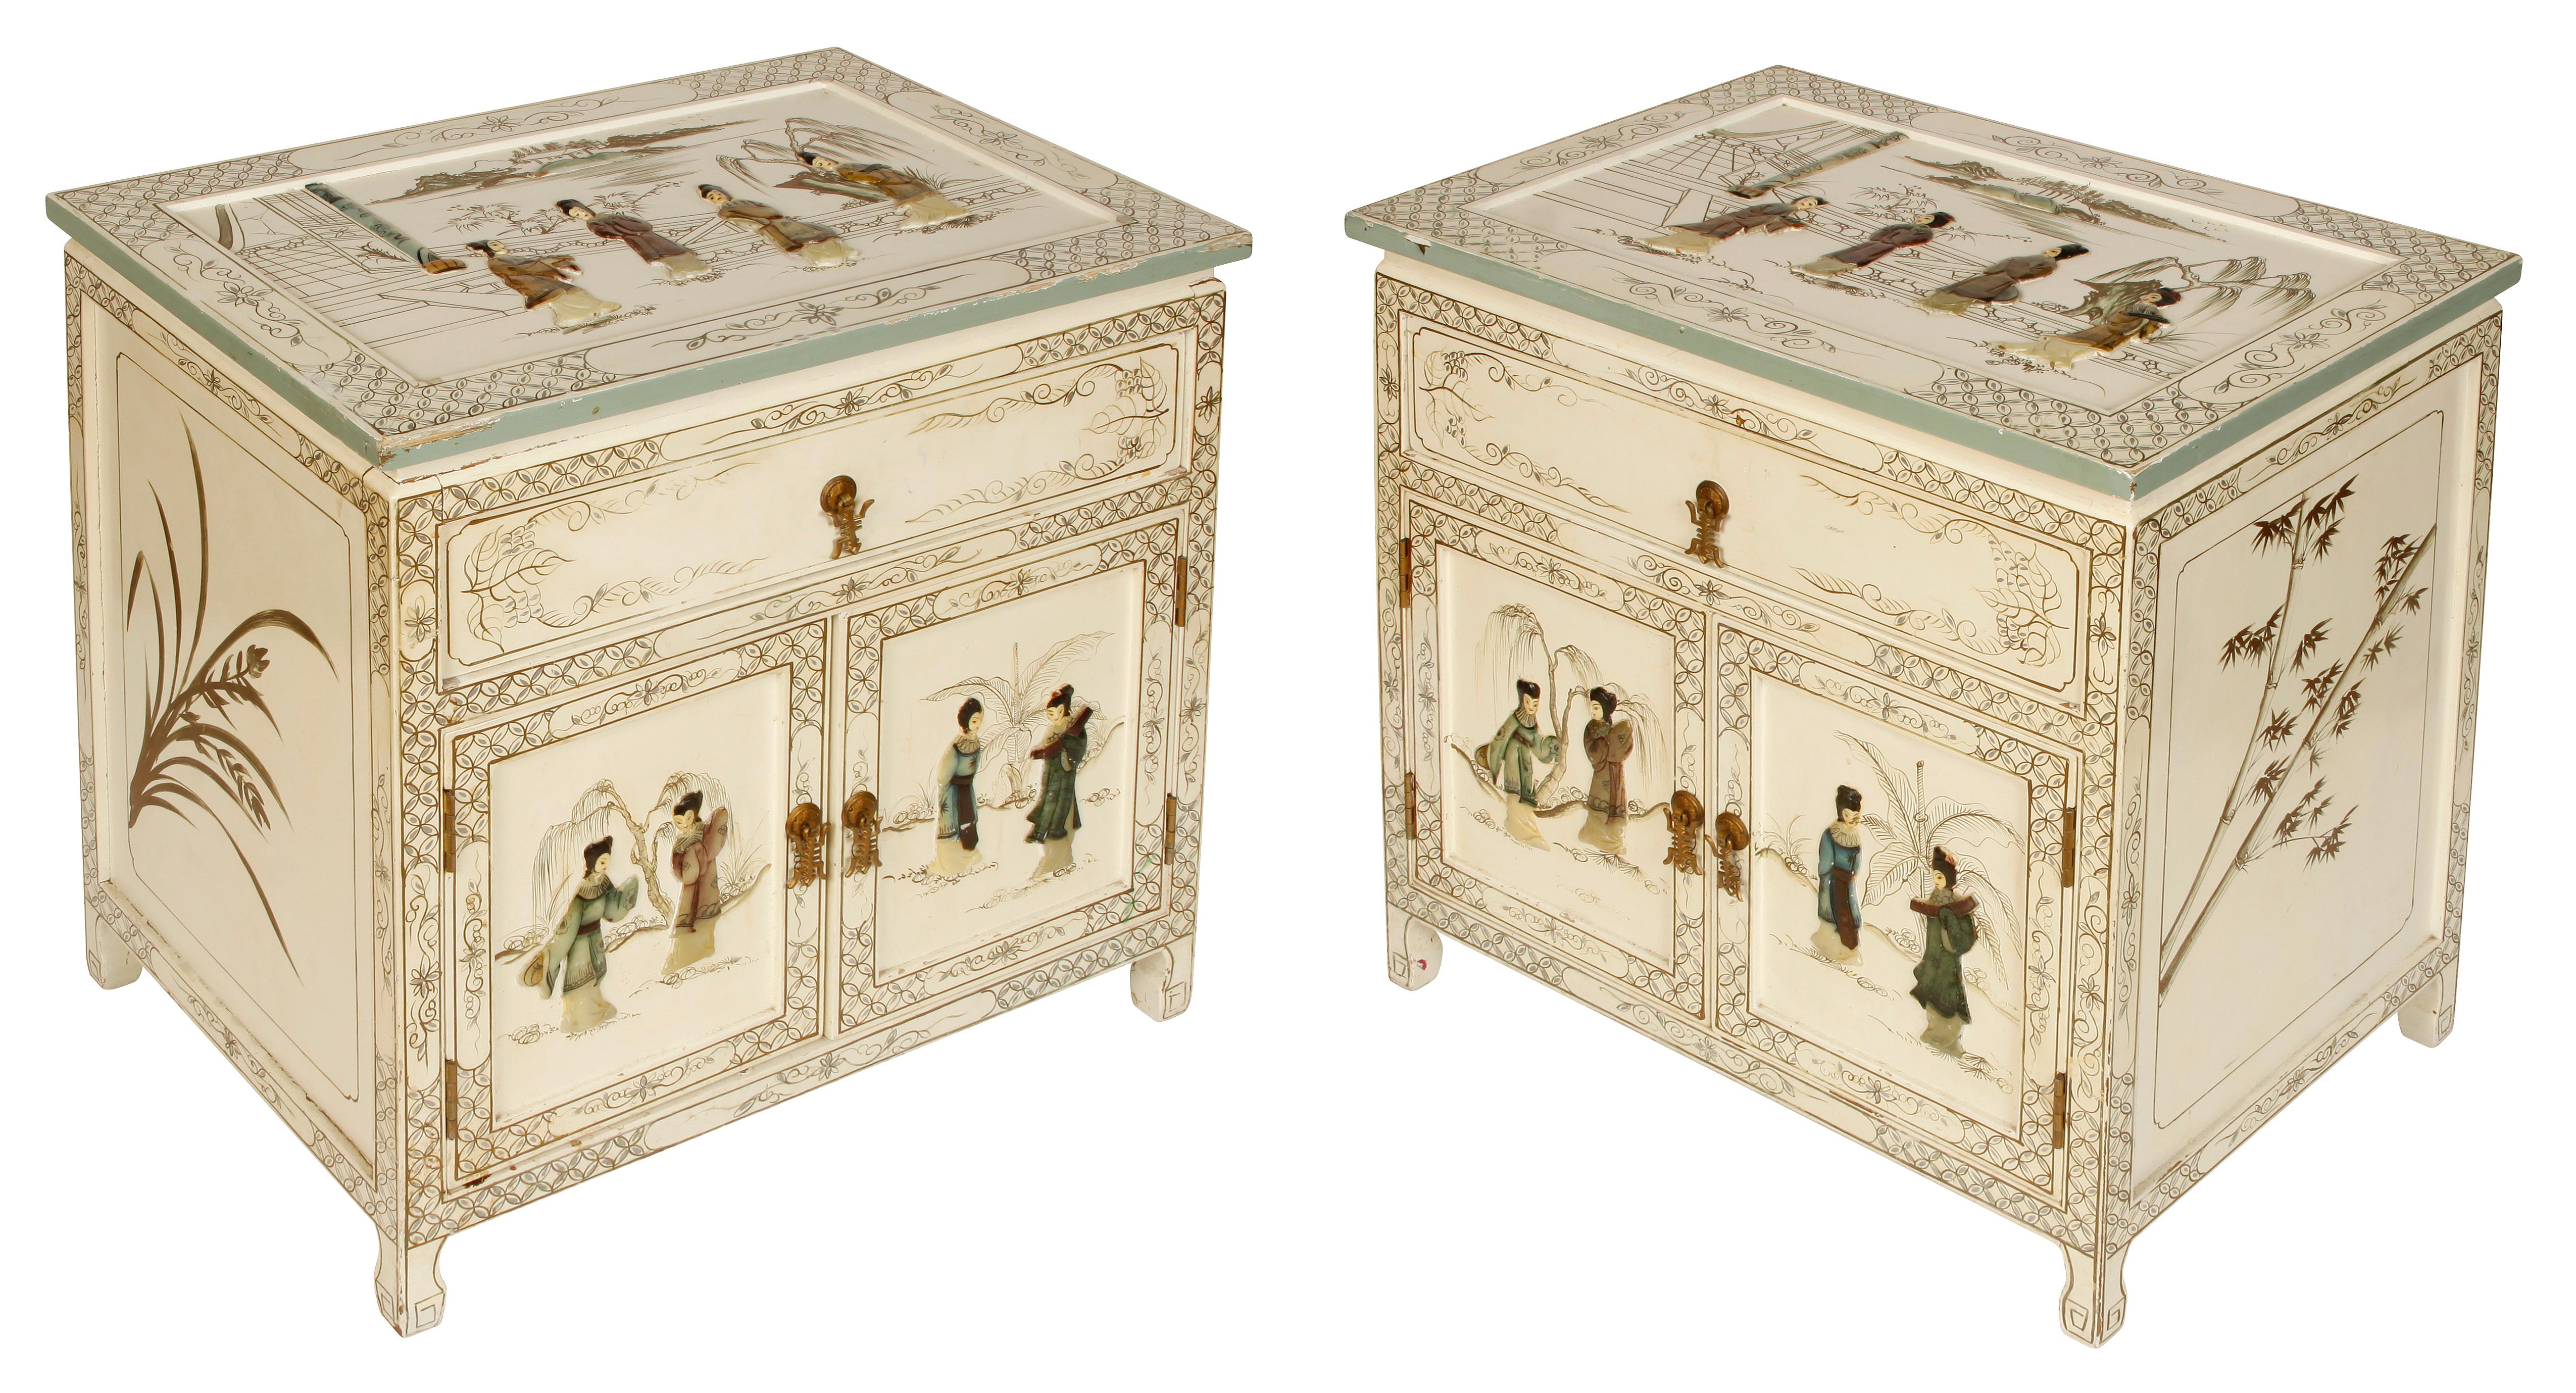 A pair of white chinoiserie painted bedside tables. Embellished with colored stone figures to tops and front doors. Painted with gold branches and detailed border.